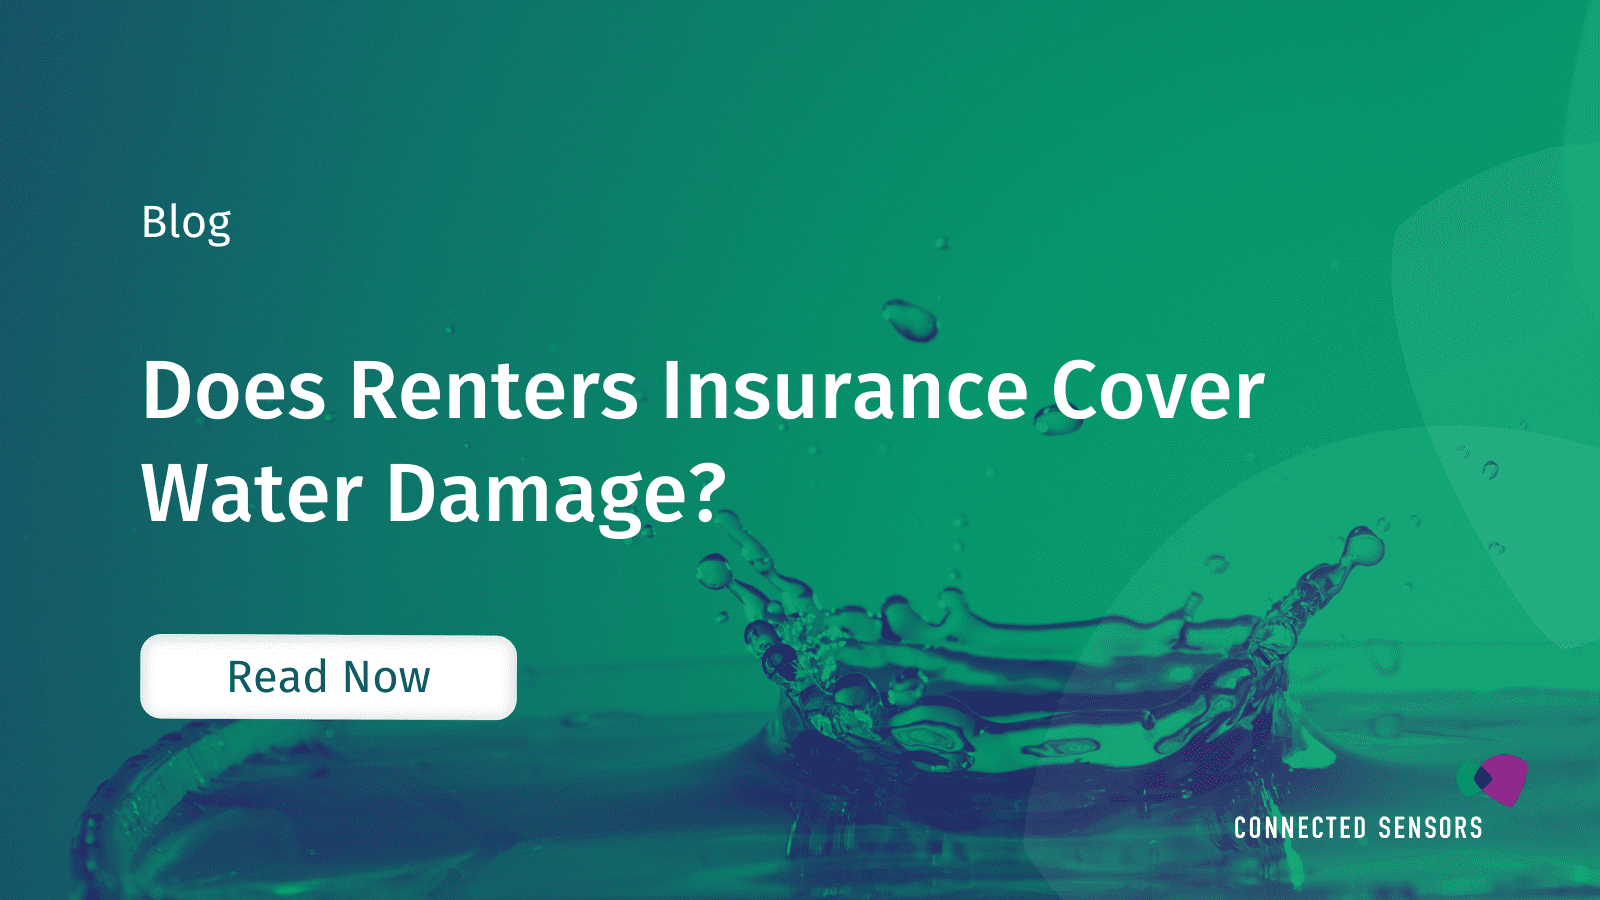 Does Renters Insurance Cover Water Damage?